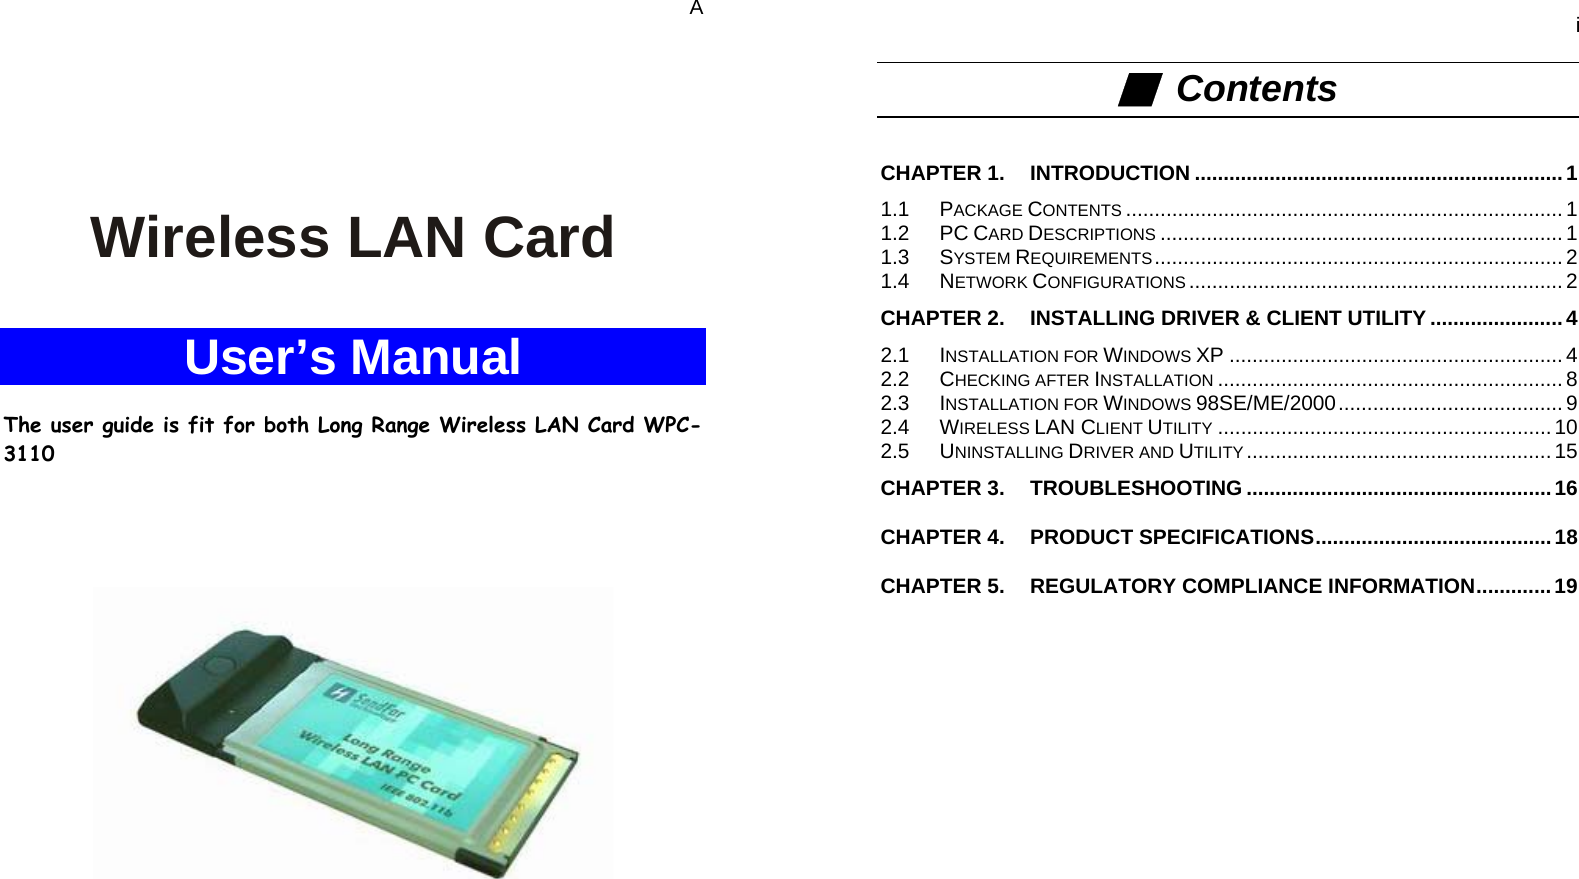   A    Wireless LAN Card  User’s Manual  The user guide is fit for both Long Range Wireless LAN Card WPC-3110         i ■  Contents  CHAPTER 1. INTRODUCTION ................................................................1 1.1 PACKAGE CONTENTS ............................................................................ 1 1.2 PC CARD DESCRIPTIONS ...................................................................... 1 1.3 SYSTEM REQUIREMENTS....................................................................... 2 1.4 NETWORK CONFIGURATIONS ................................................................. 2 CHAPTER 2. INSTALLING DRIVER &amp; CLIENT UTILITY .......................4 2.1 INSTALLATION FOR WINDOWS XP .......................................................... 4 2.2 CHECKING AFTER INSTALLATION ............................................................ 8 2.3 INSTALLATION FOR WINDOWS 98SE/ME/2000....................................... 9 2.4 WIRELESS LAN CLIENT UTILITY .......................................................... 10 2.5 UNINSTALLING DRIVER AND UTILITY ..................................................... 15 CHAPTER 3. TROUBLESHOOTING .....................................................16 CHAPTER 4. PRODUCT SPECIFICATIONS.........................................18 CHAPTER 5. REGULATORY COMPLIANCE INFORMATION.............19    